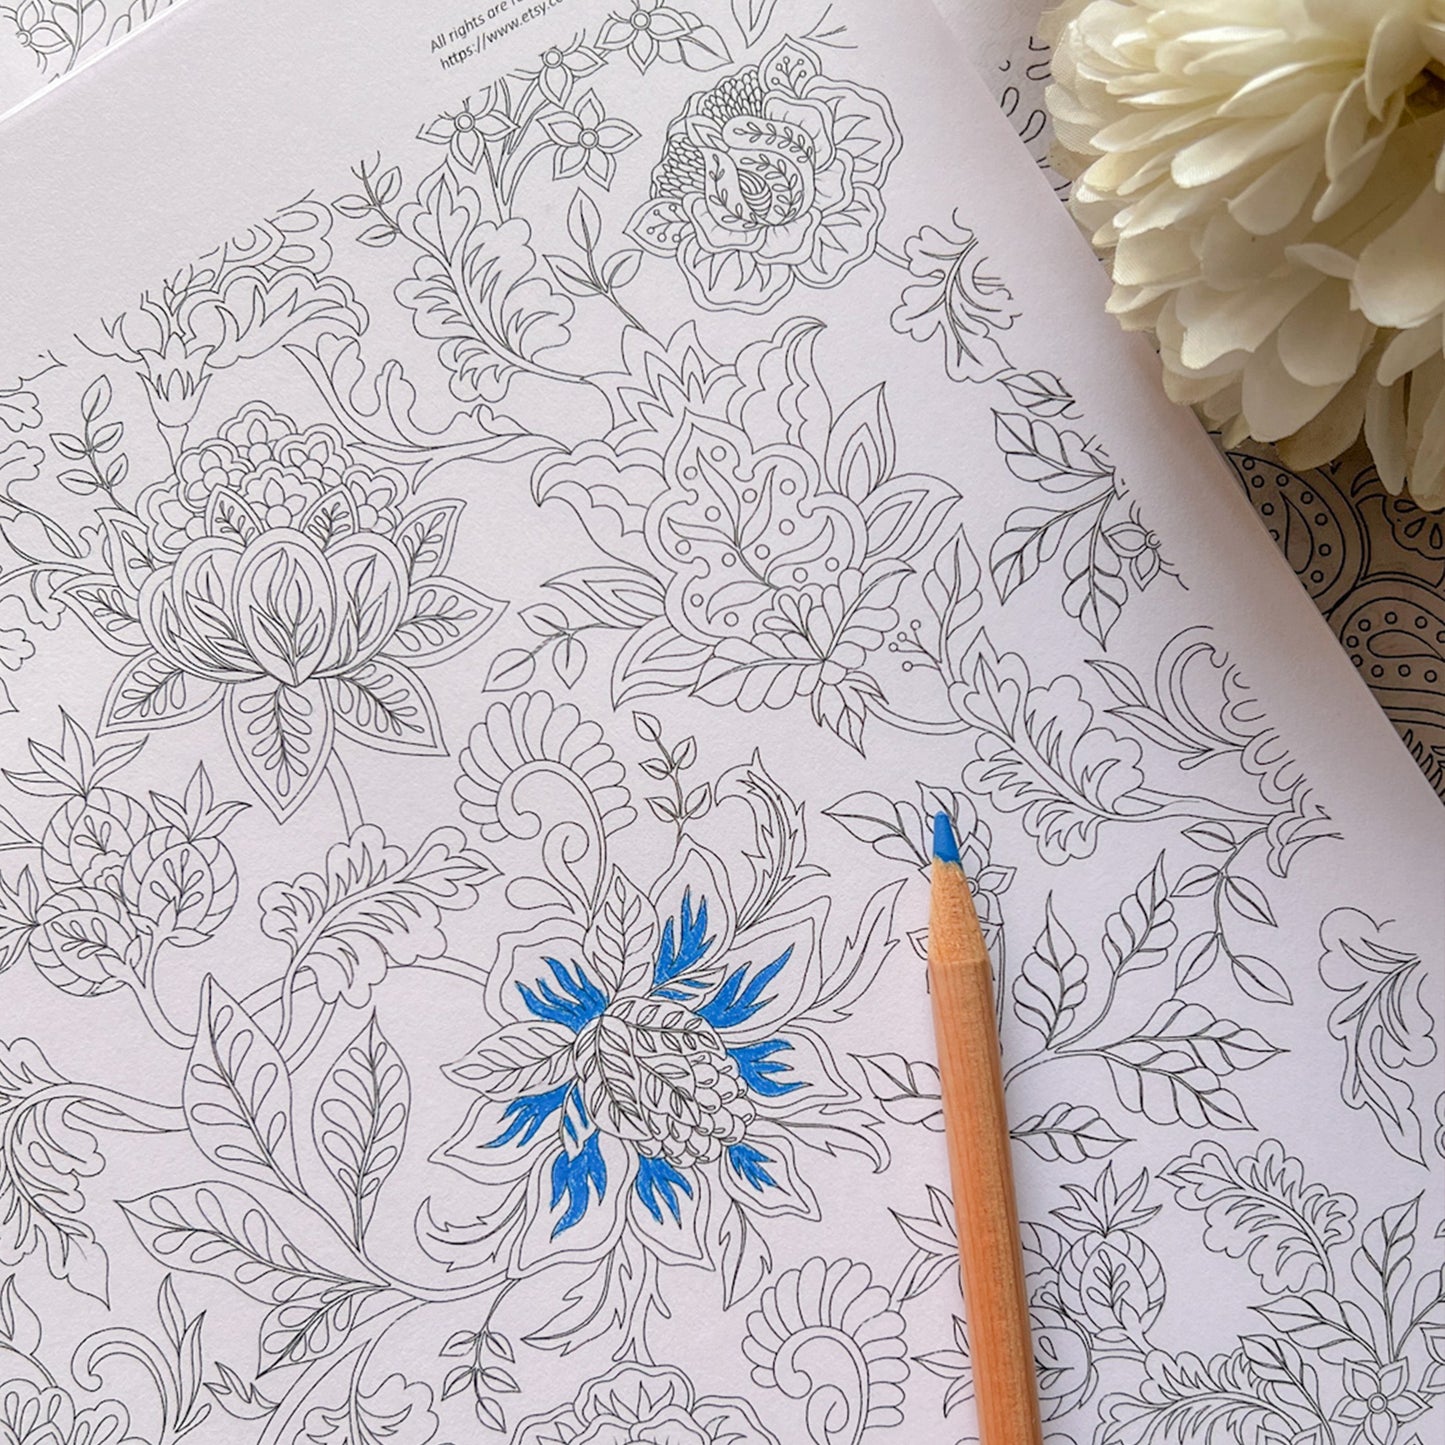 Hues of Blues | PDF Adult Coloring Page | Instant Download